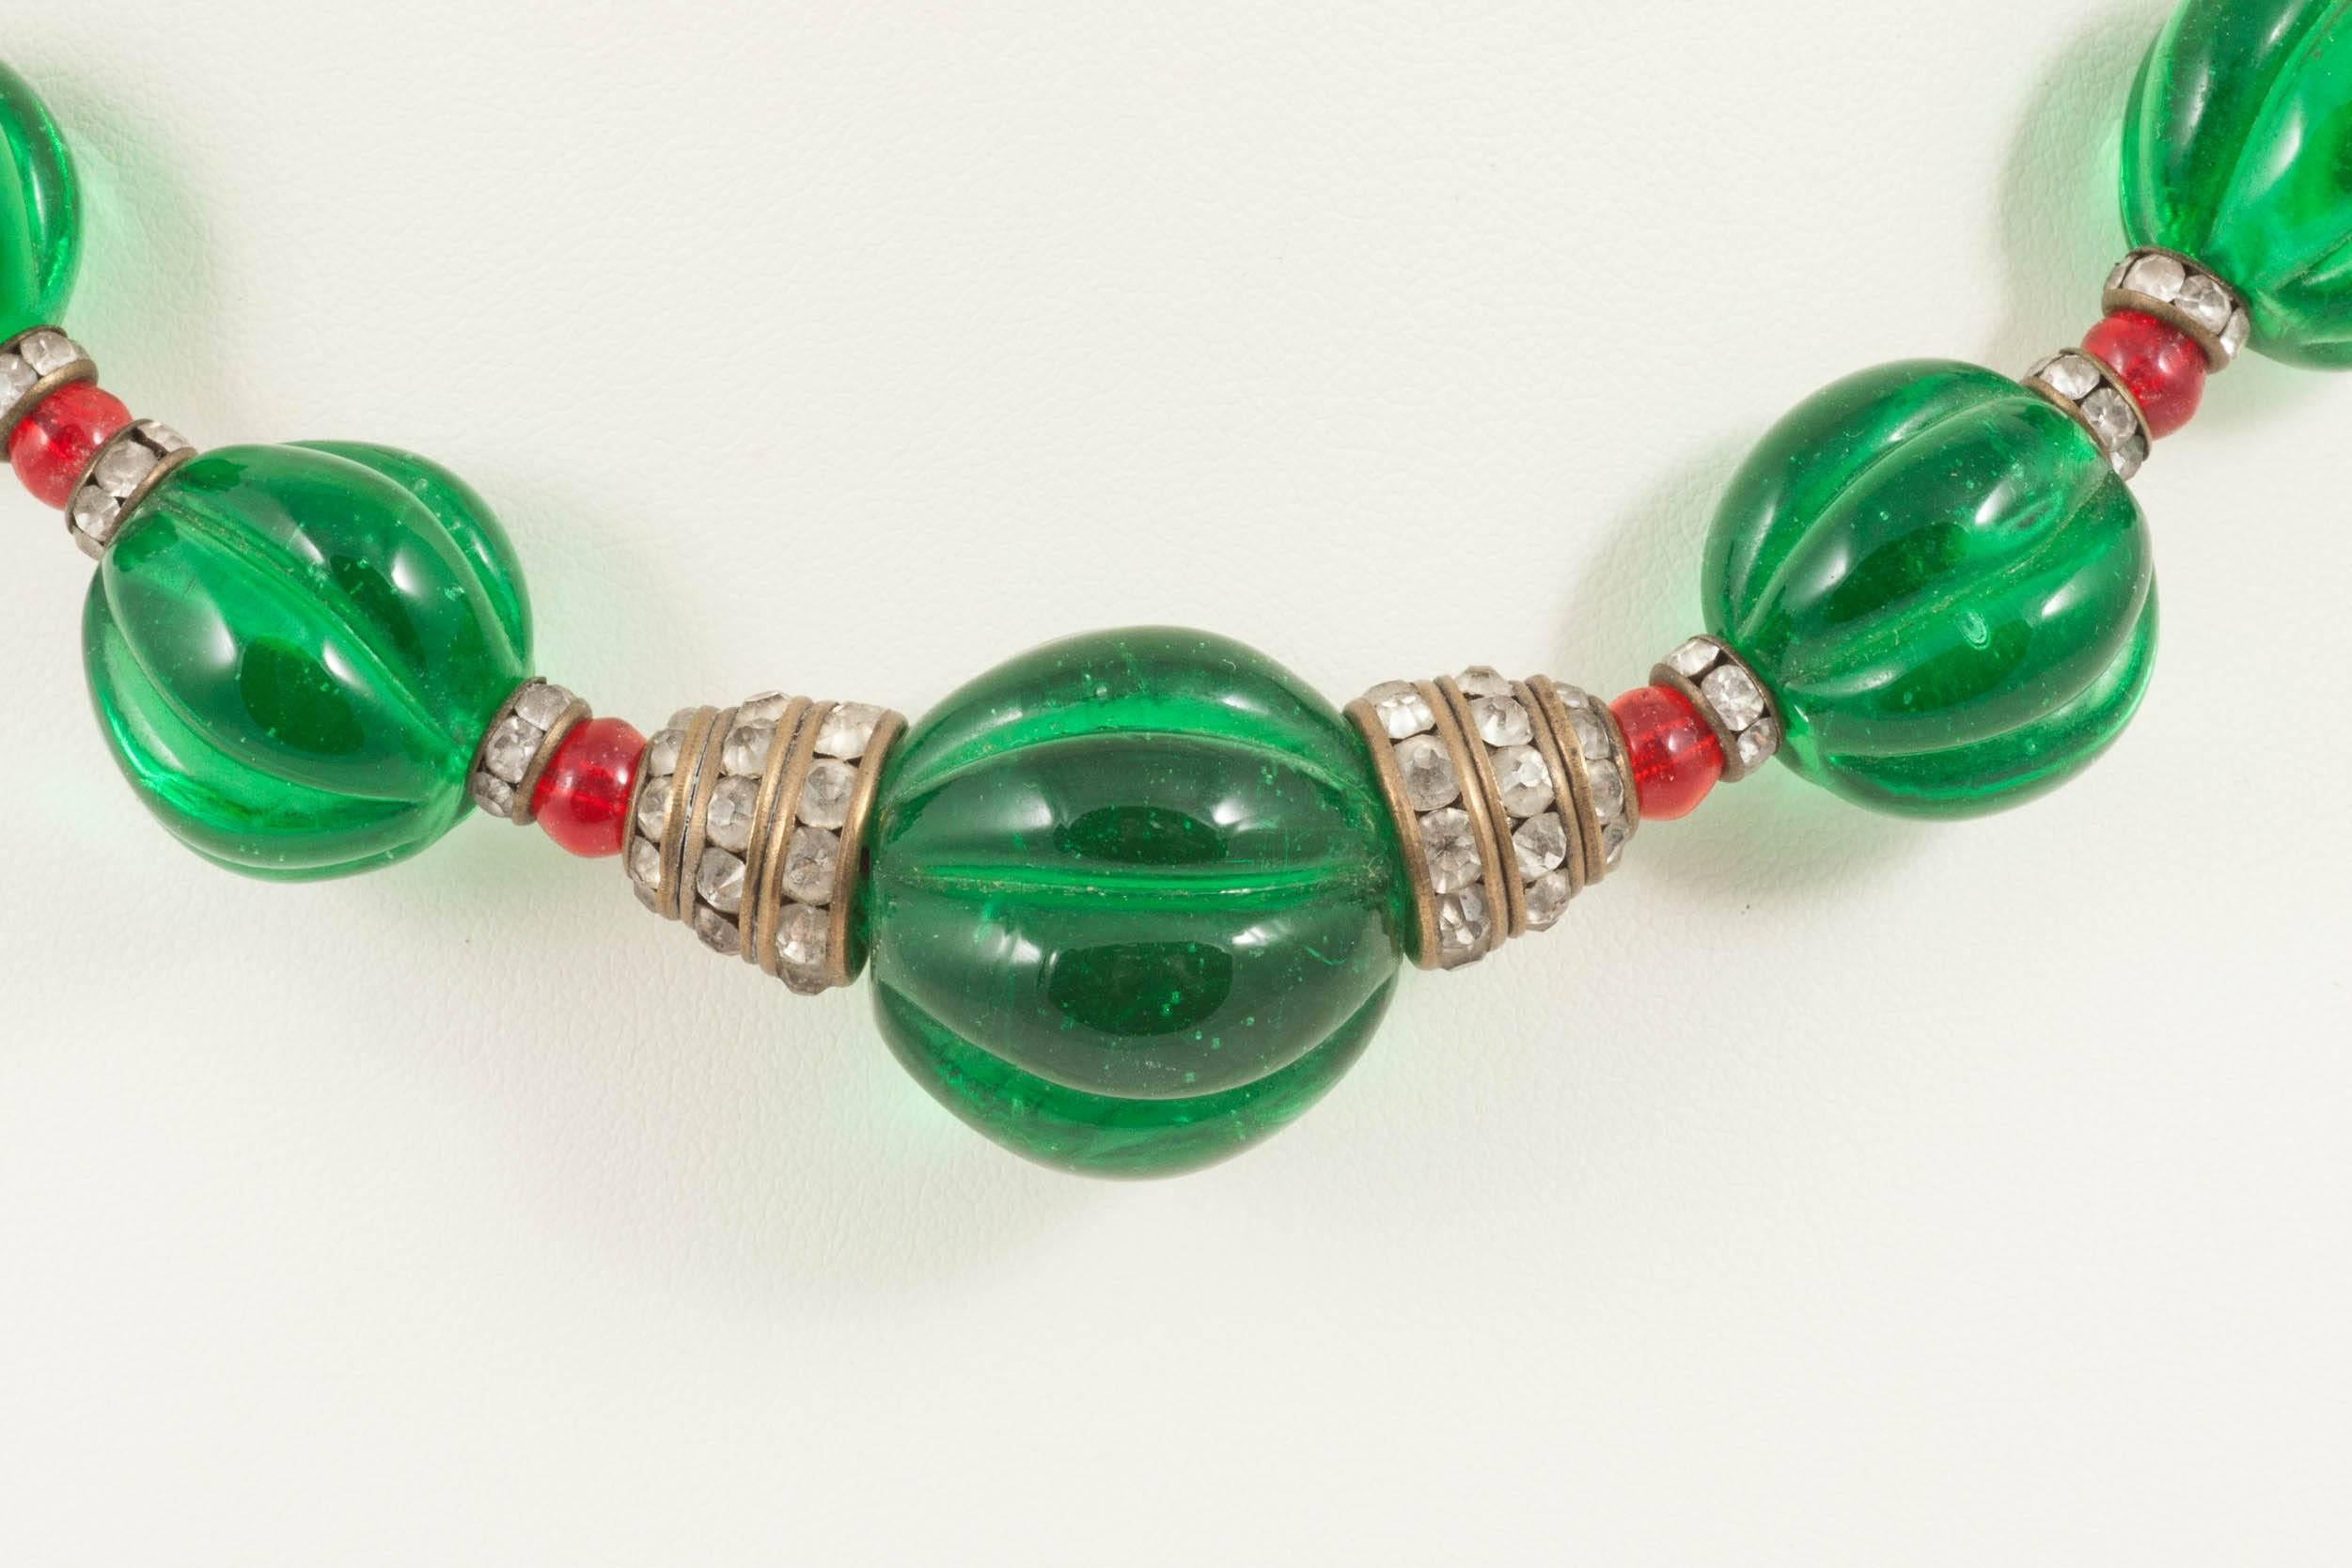 A shorter, very wearable graduated necklace made by Maison Gripoix for Chanel in the late 1930s. Poured glass melon cut emerald beads are interspersed with several rows of small poured glass ruby beads, and characteristic paste rondelles.
This